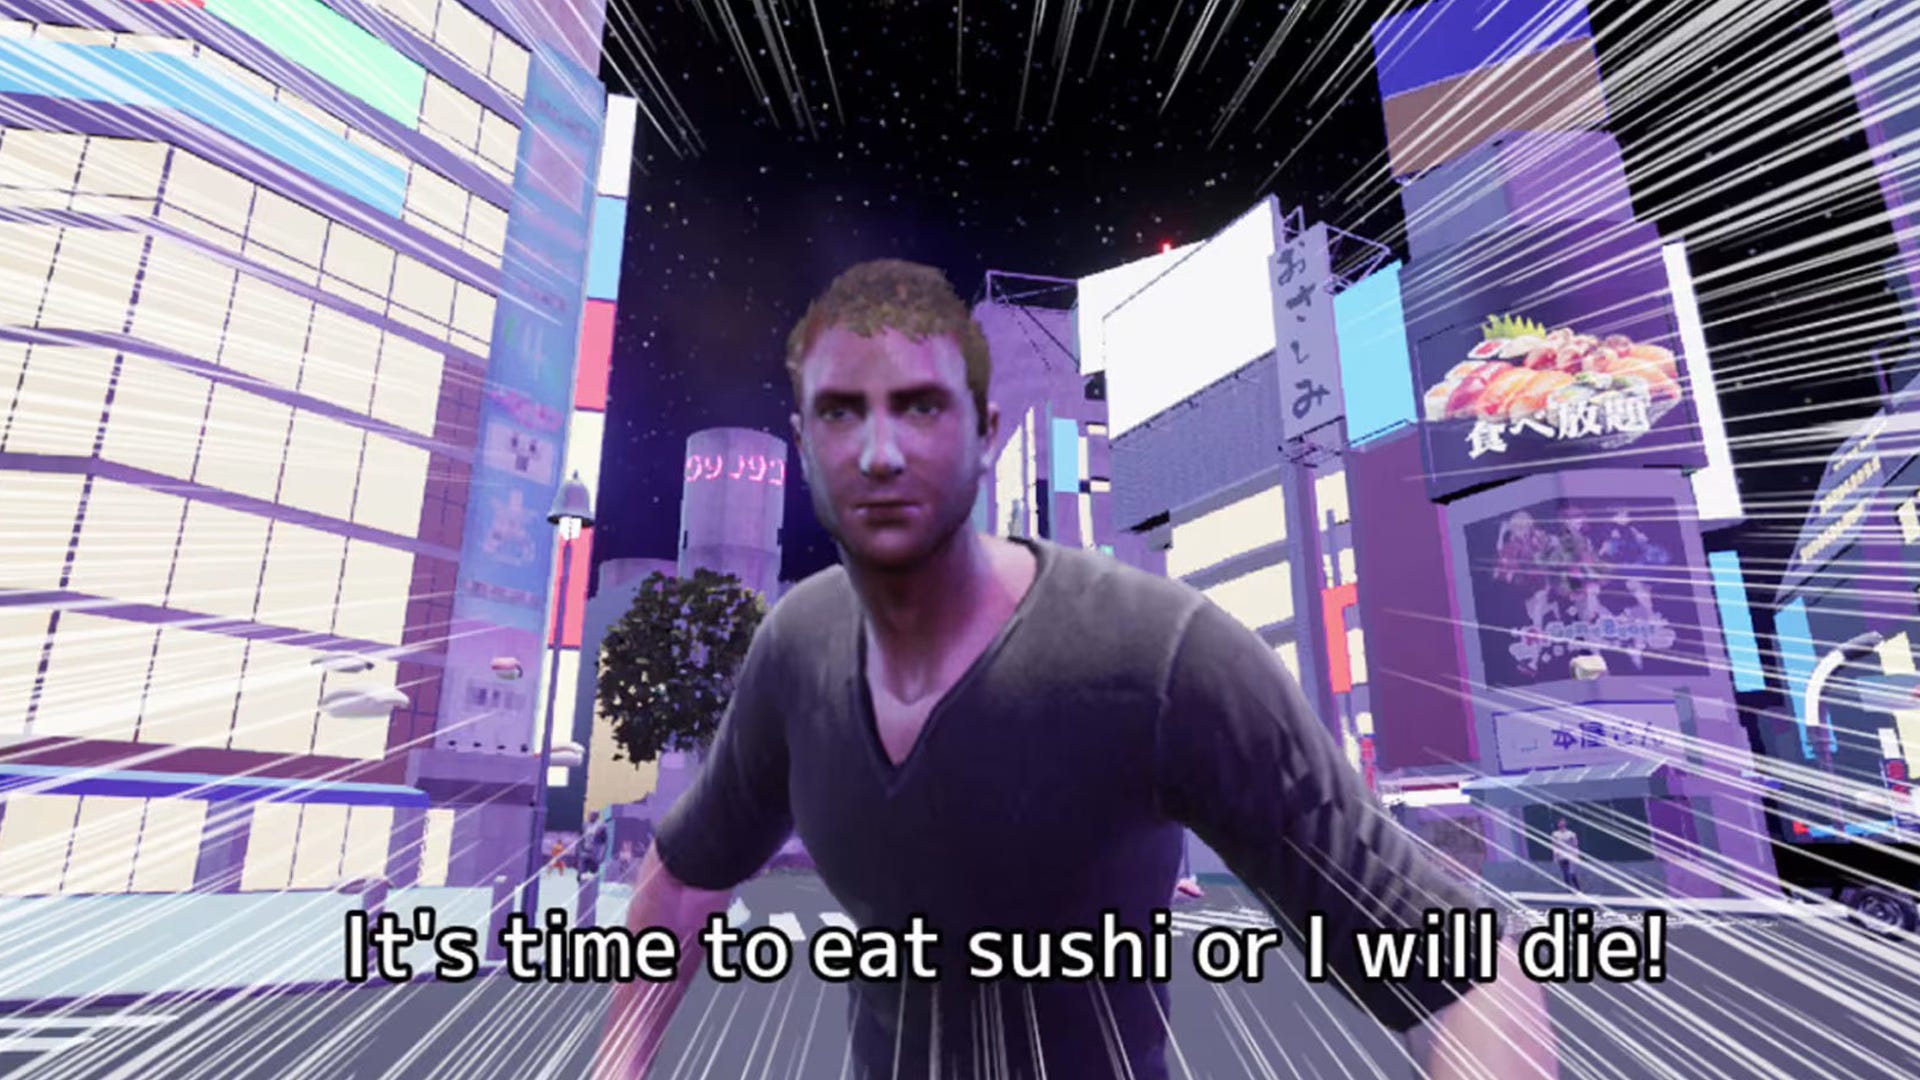 I am obsessed with this new Nintendo Switch game where you are a man who will die if he doesn't eat sushi